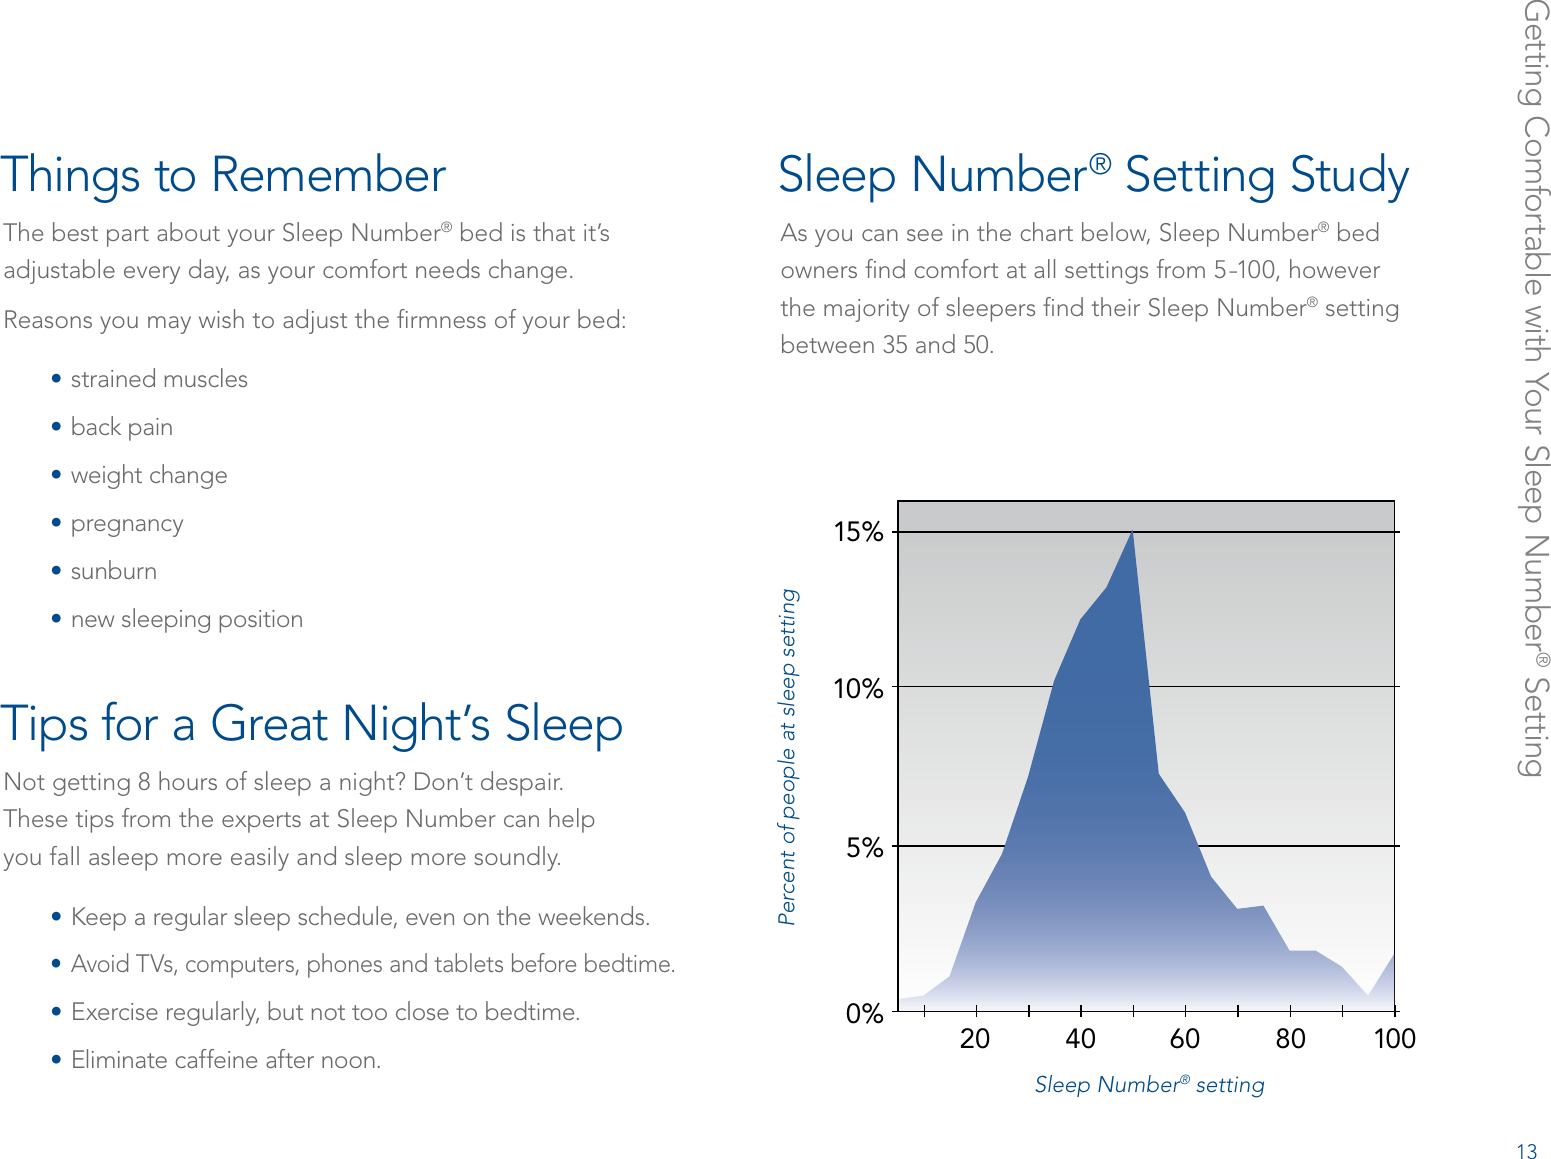 Getting Comfortable with Your Sleep Number® SettingSleep Number® Setting StudyAs you can see in the chart below, Sleep Number® bed  owners ﬁnd comfort at all settings from 5-100, however  the majority of sleepers ﬁnd their Sleep Number® setting  between 35 and 50.Things to RememberThe best part about your Sleep Number® bed is that it’s adjustable every day, as your comfort needs change.Reasons you may wish to adjust the ﬁrmness of your bed: • strained muscles• back pain• weight change• pregnancy• sunburn• new sleeping positionTips for a Great Night’s SleepNot getting 8 hours of sleep a night? Don’t despair.  These tips from the experts at Sleep Number can help  you fall asleep more easily and sleep more soundly.• Keep a regular sleep schedule, even on the weekends.• Avoid TVs, computers, phones and tablets before bedtime.• Exercise regularly, but not too close to bedtime.• Eliminate caffeine after noon.0% 5% 10% 15% 20  40  60  80  100 Percent of people at sleep settingSleep Number® setting13